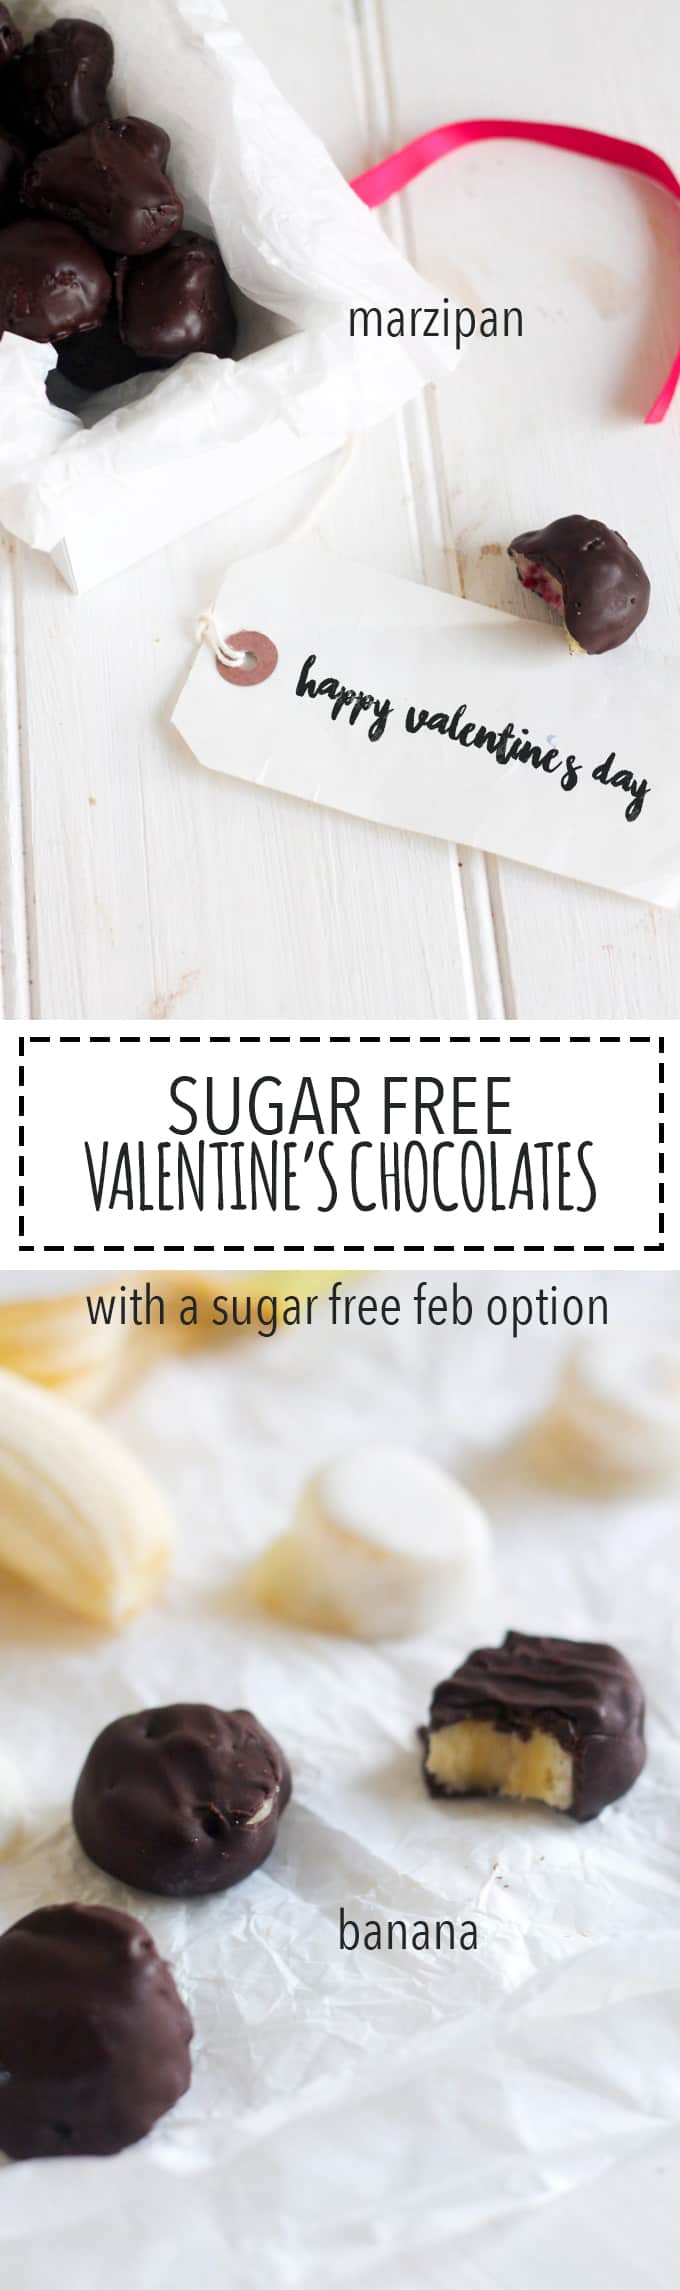 Valentine's Day Sugar Free Chocolates | Raising Sugar Free Kids - includes two versions: marzipan for adults and banana for children, as well as a Sugar Free February option. These chocolates are surprisingly delicious and will disappear quick! A perfect little after dinner treat for Valentine's Day!